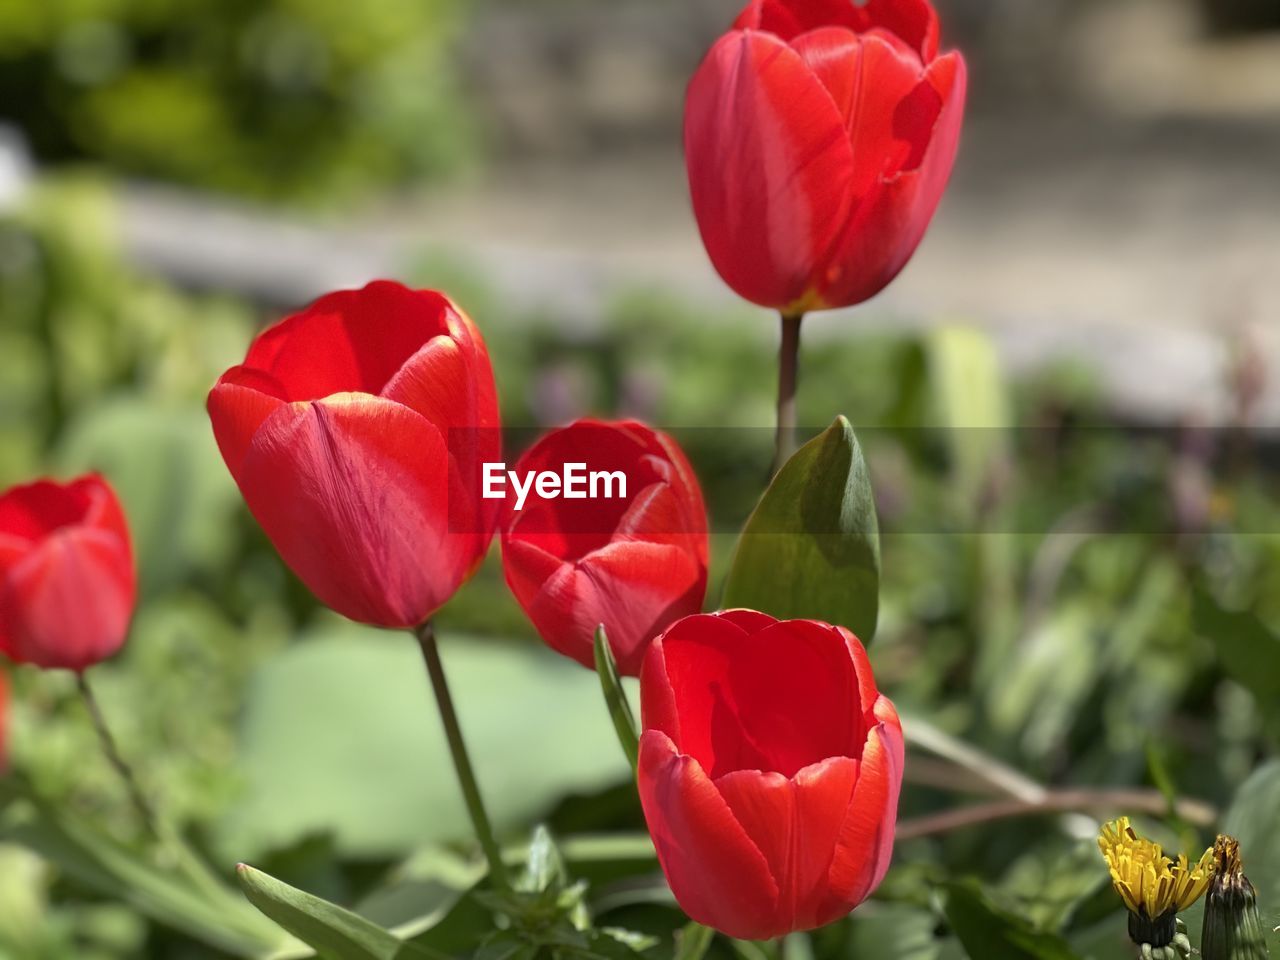 CLOSE-UP OF RED TULIP FLOWERS